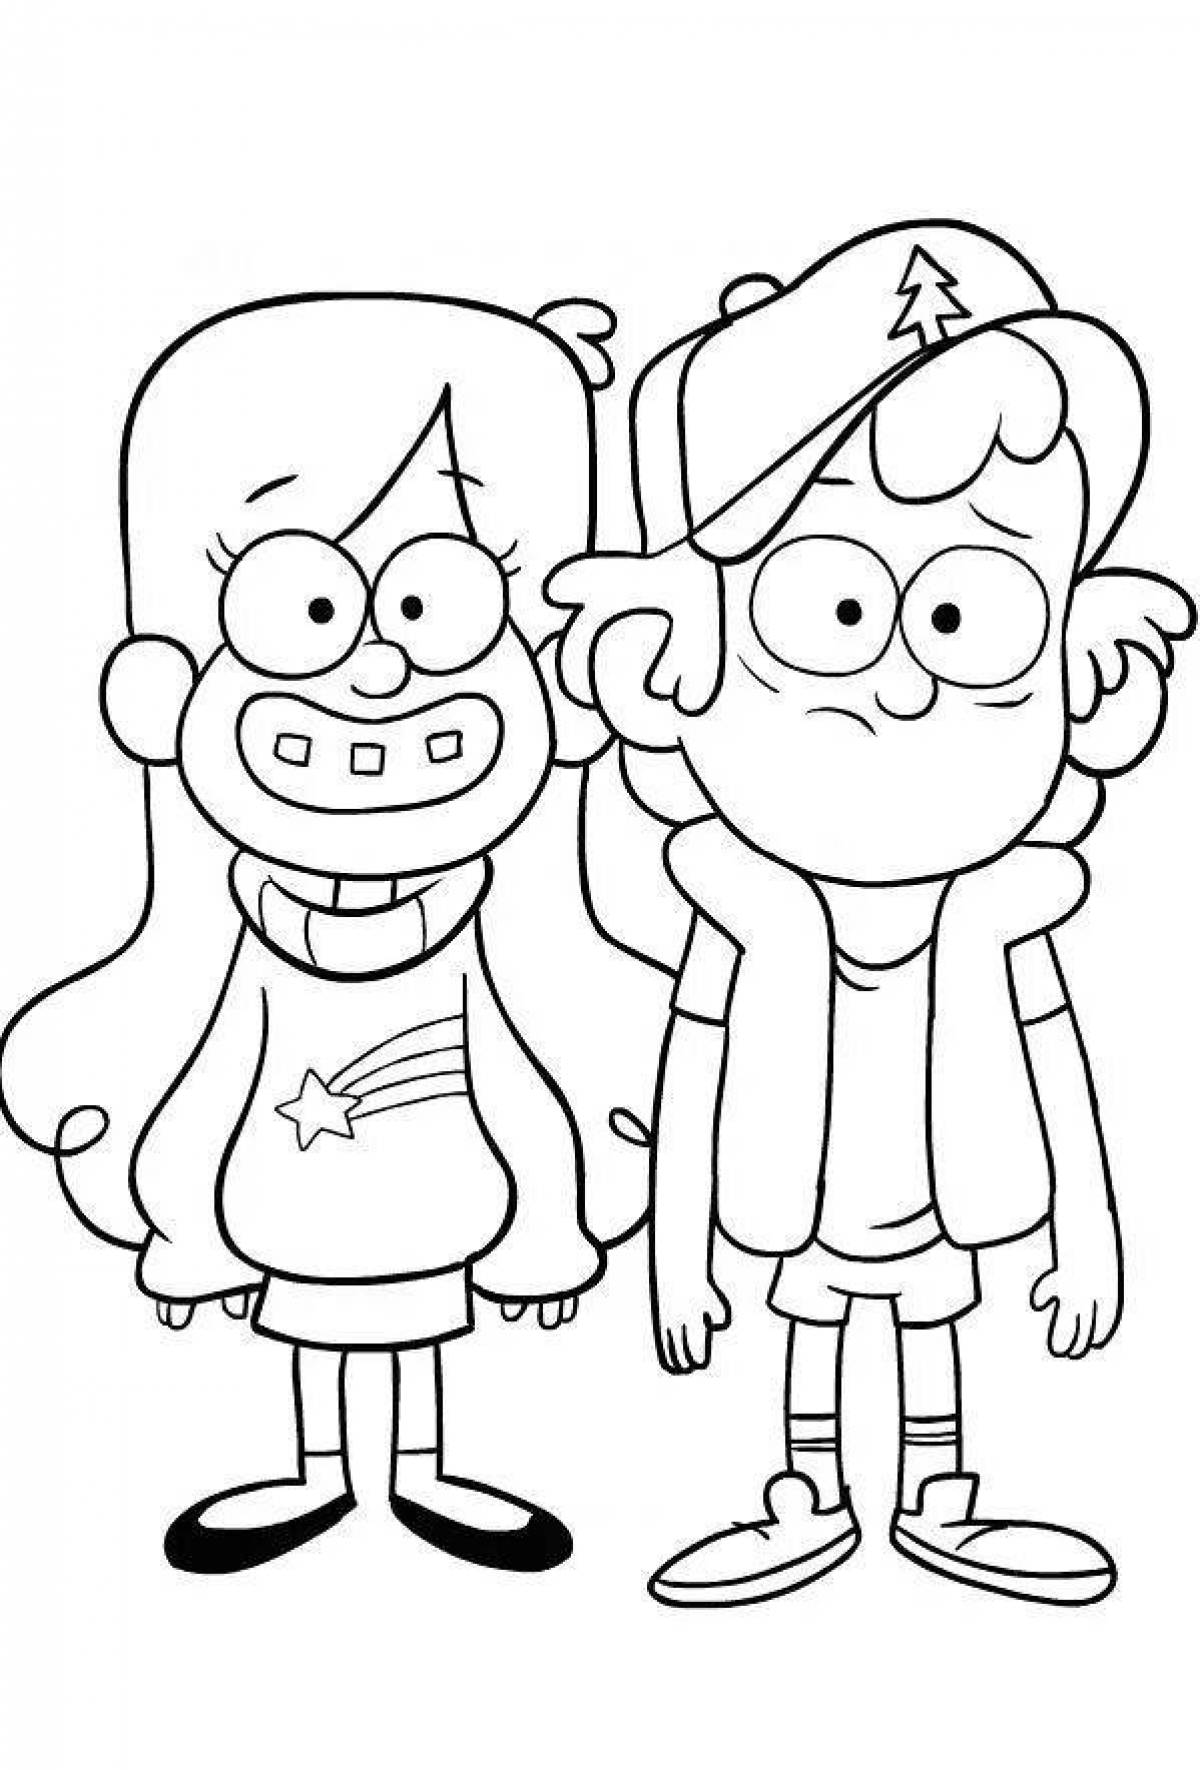 Coloring page funny mabel